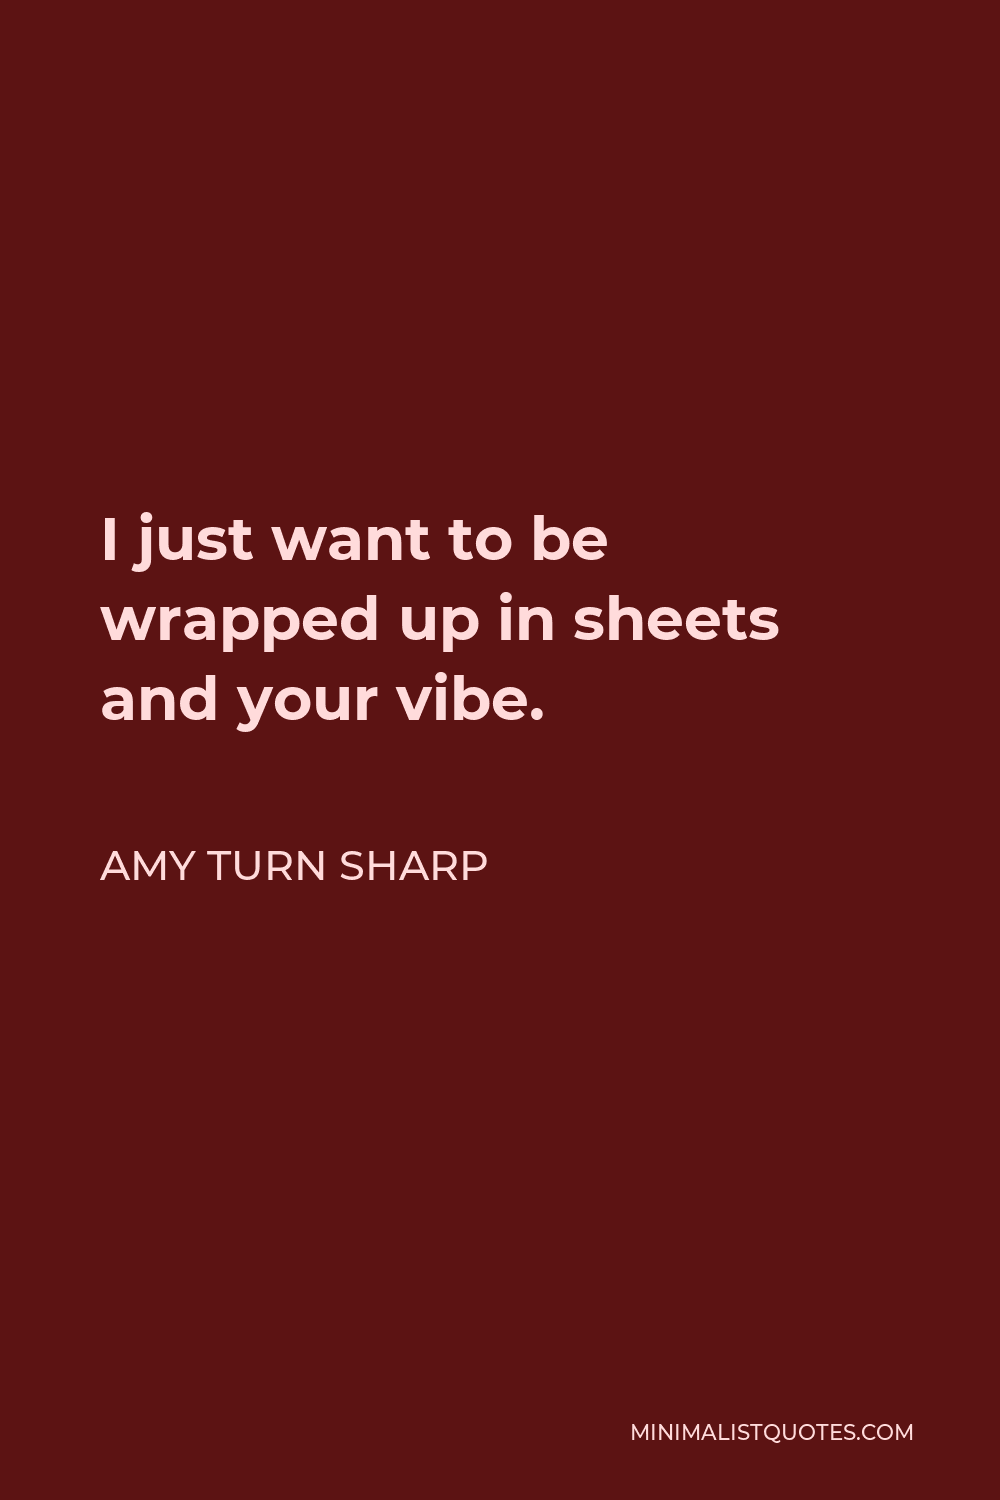 Amy Turn Sharp Quote - I just want to be wrapped up in sheets and your vibe.